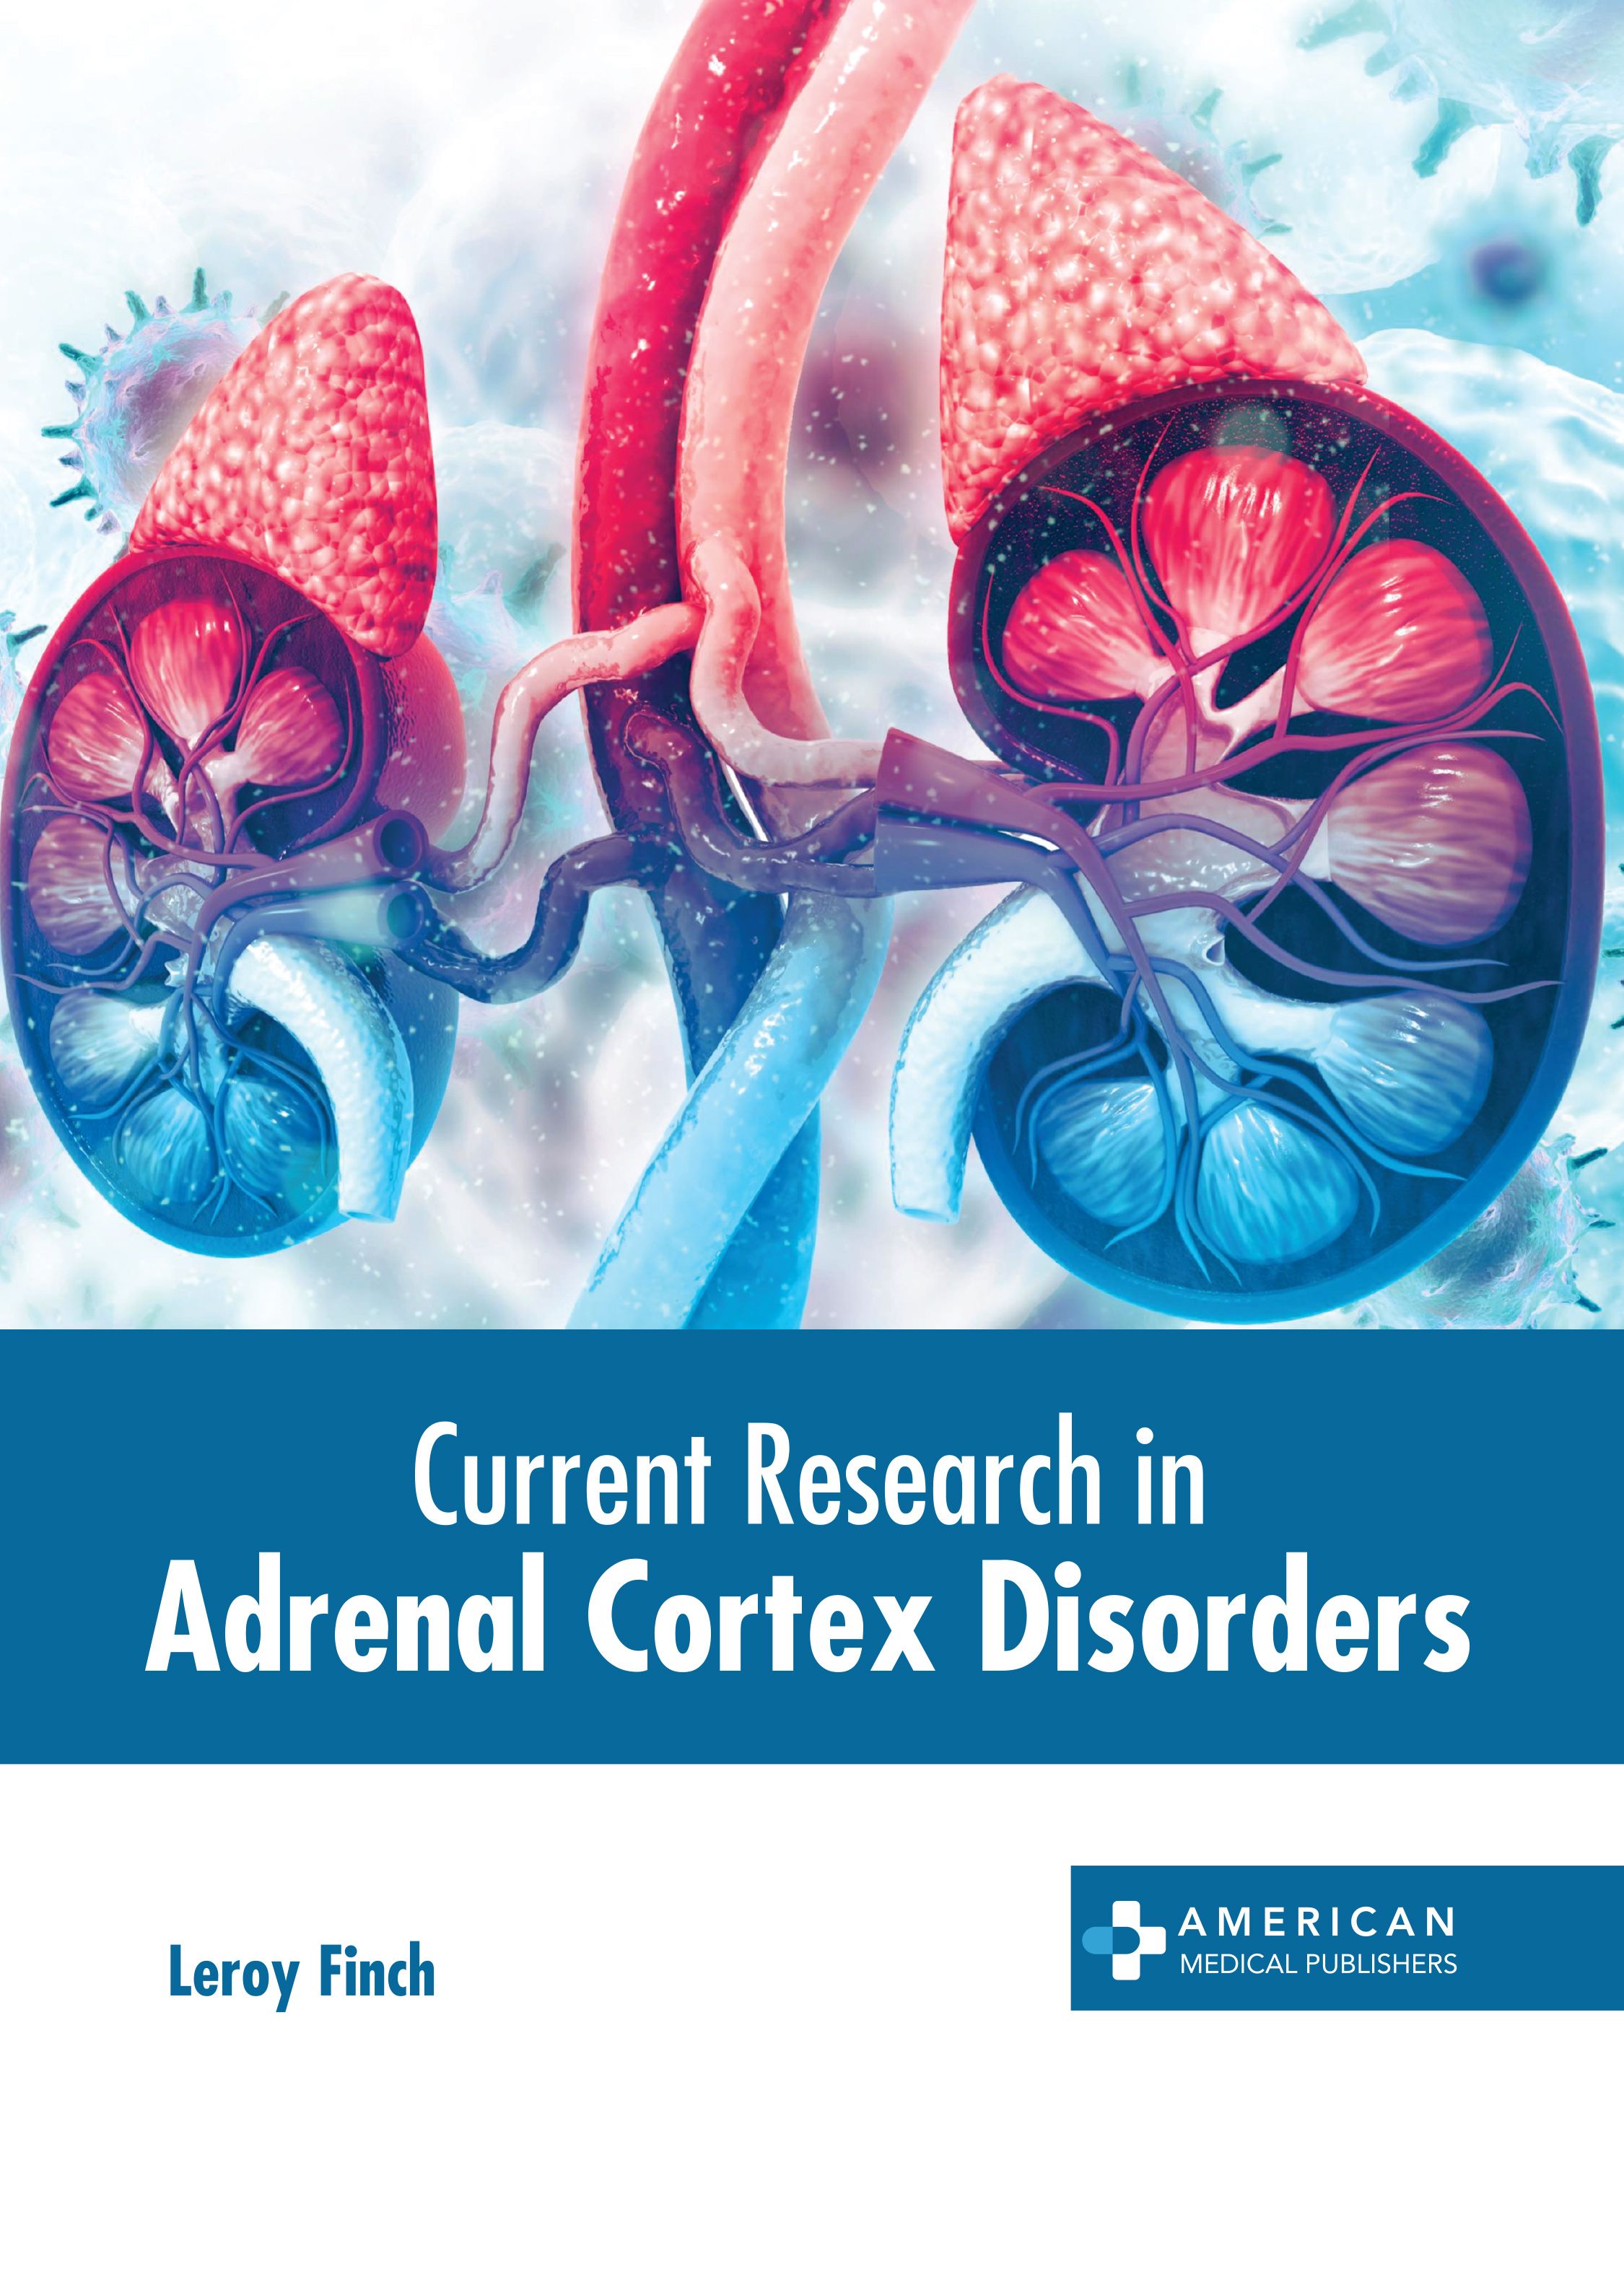 CURRENT RESEARCH IN ADRENAL CORTEX DISORDERS